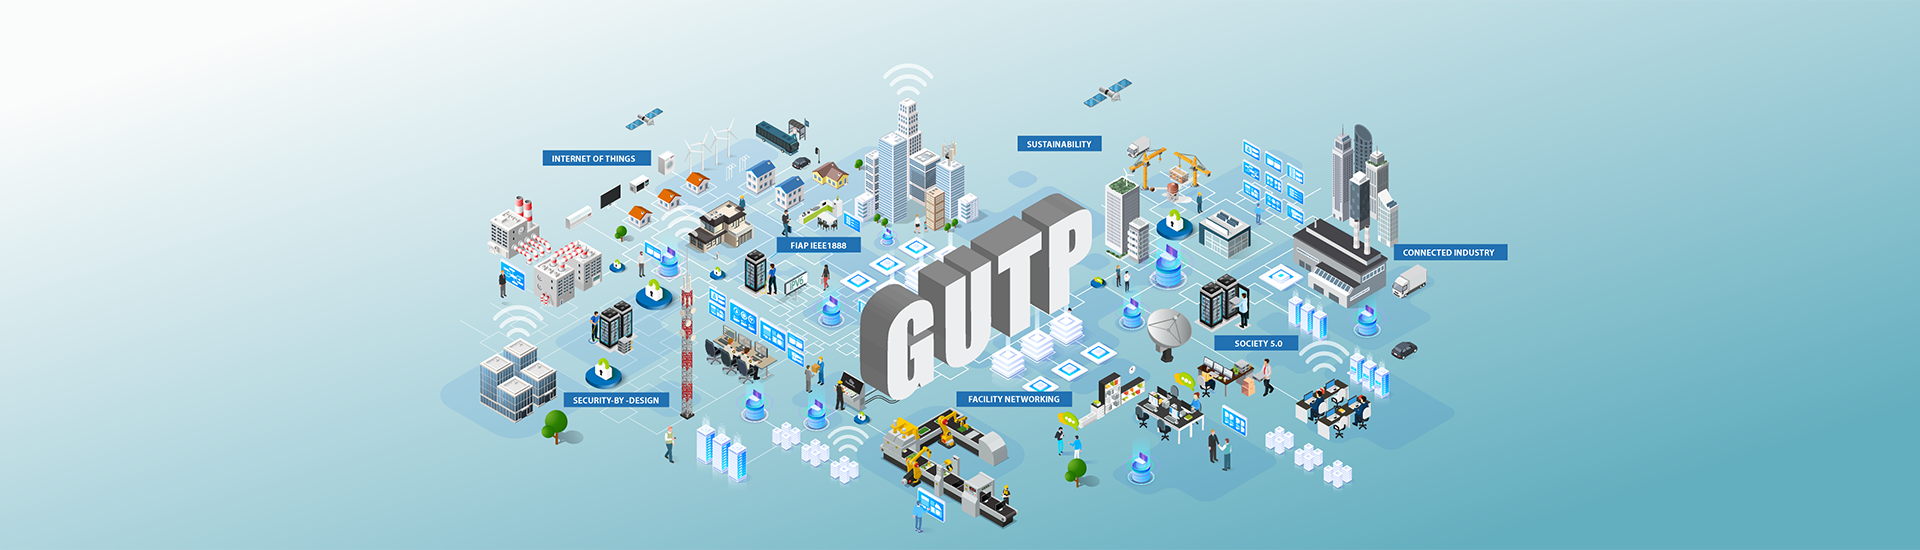 Research and development arena of GUTP